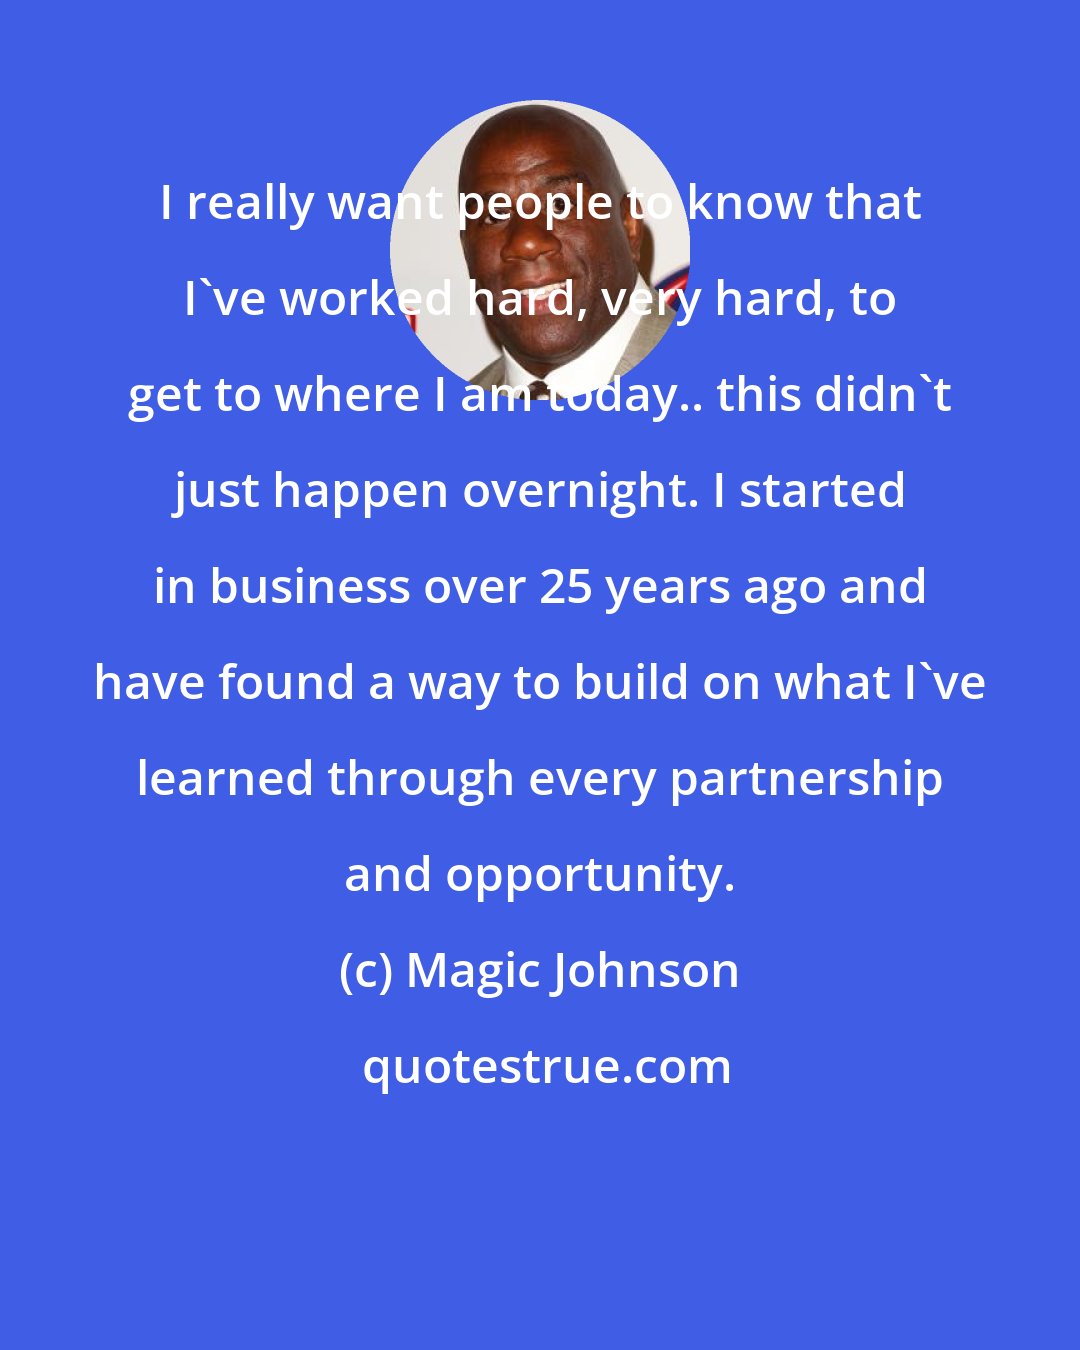 Magic Johnson: I really want people to know that I've worked hard, very hard, to get to where I am today.. this didn't just happen overnight. I started in business over 25 years ago and have found a way to build on what I've learned through every partnership and opportunity.